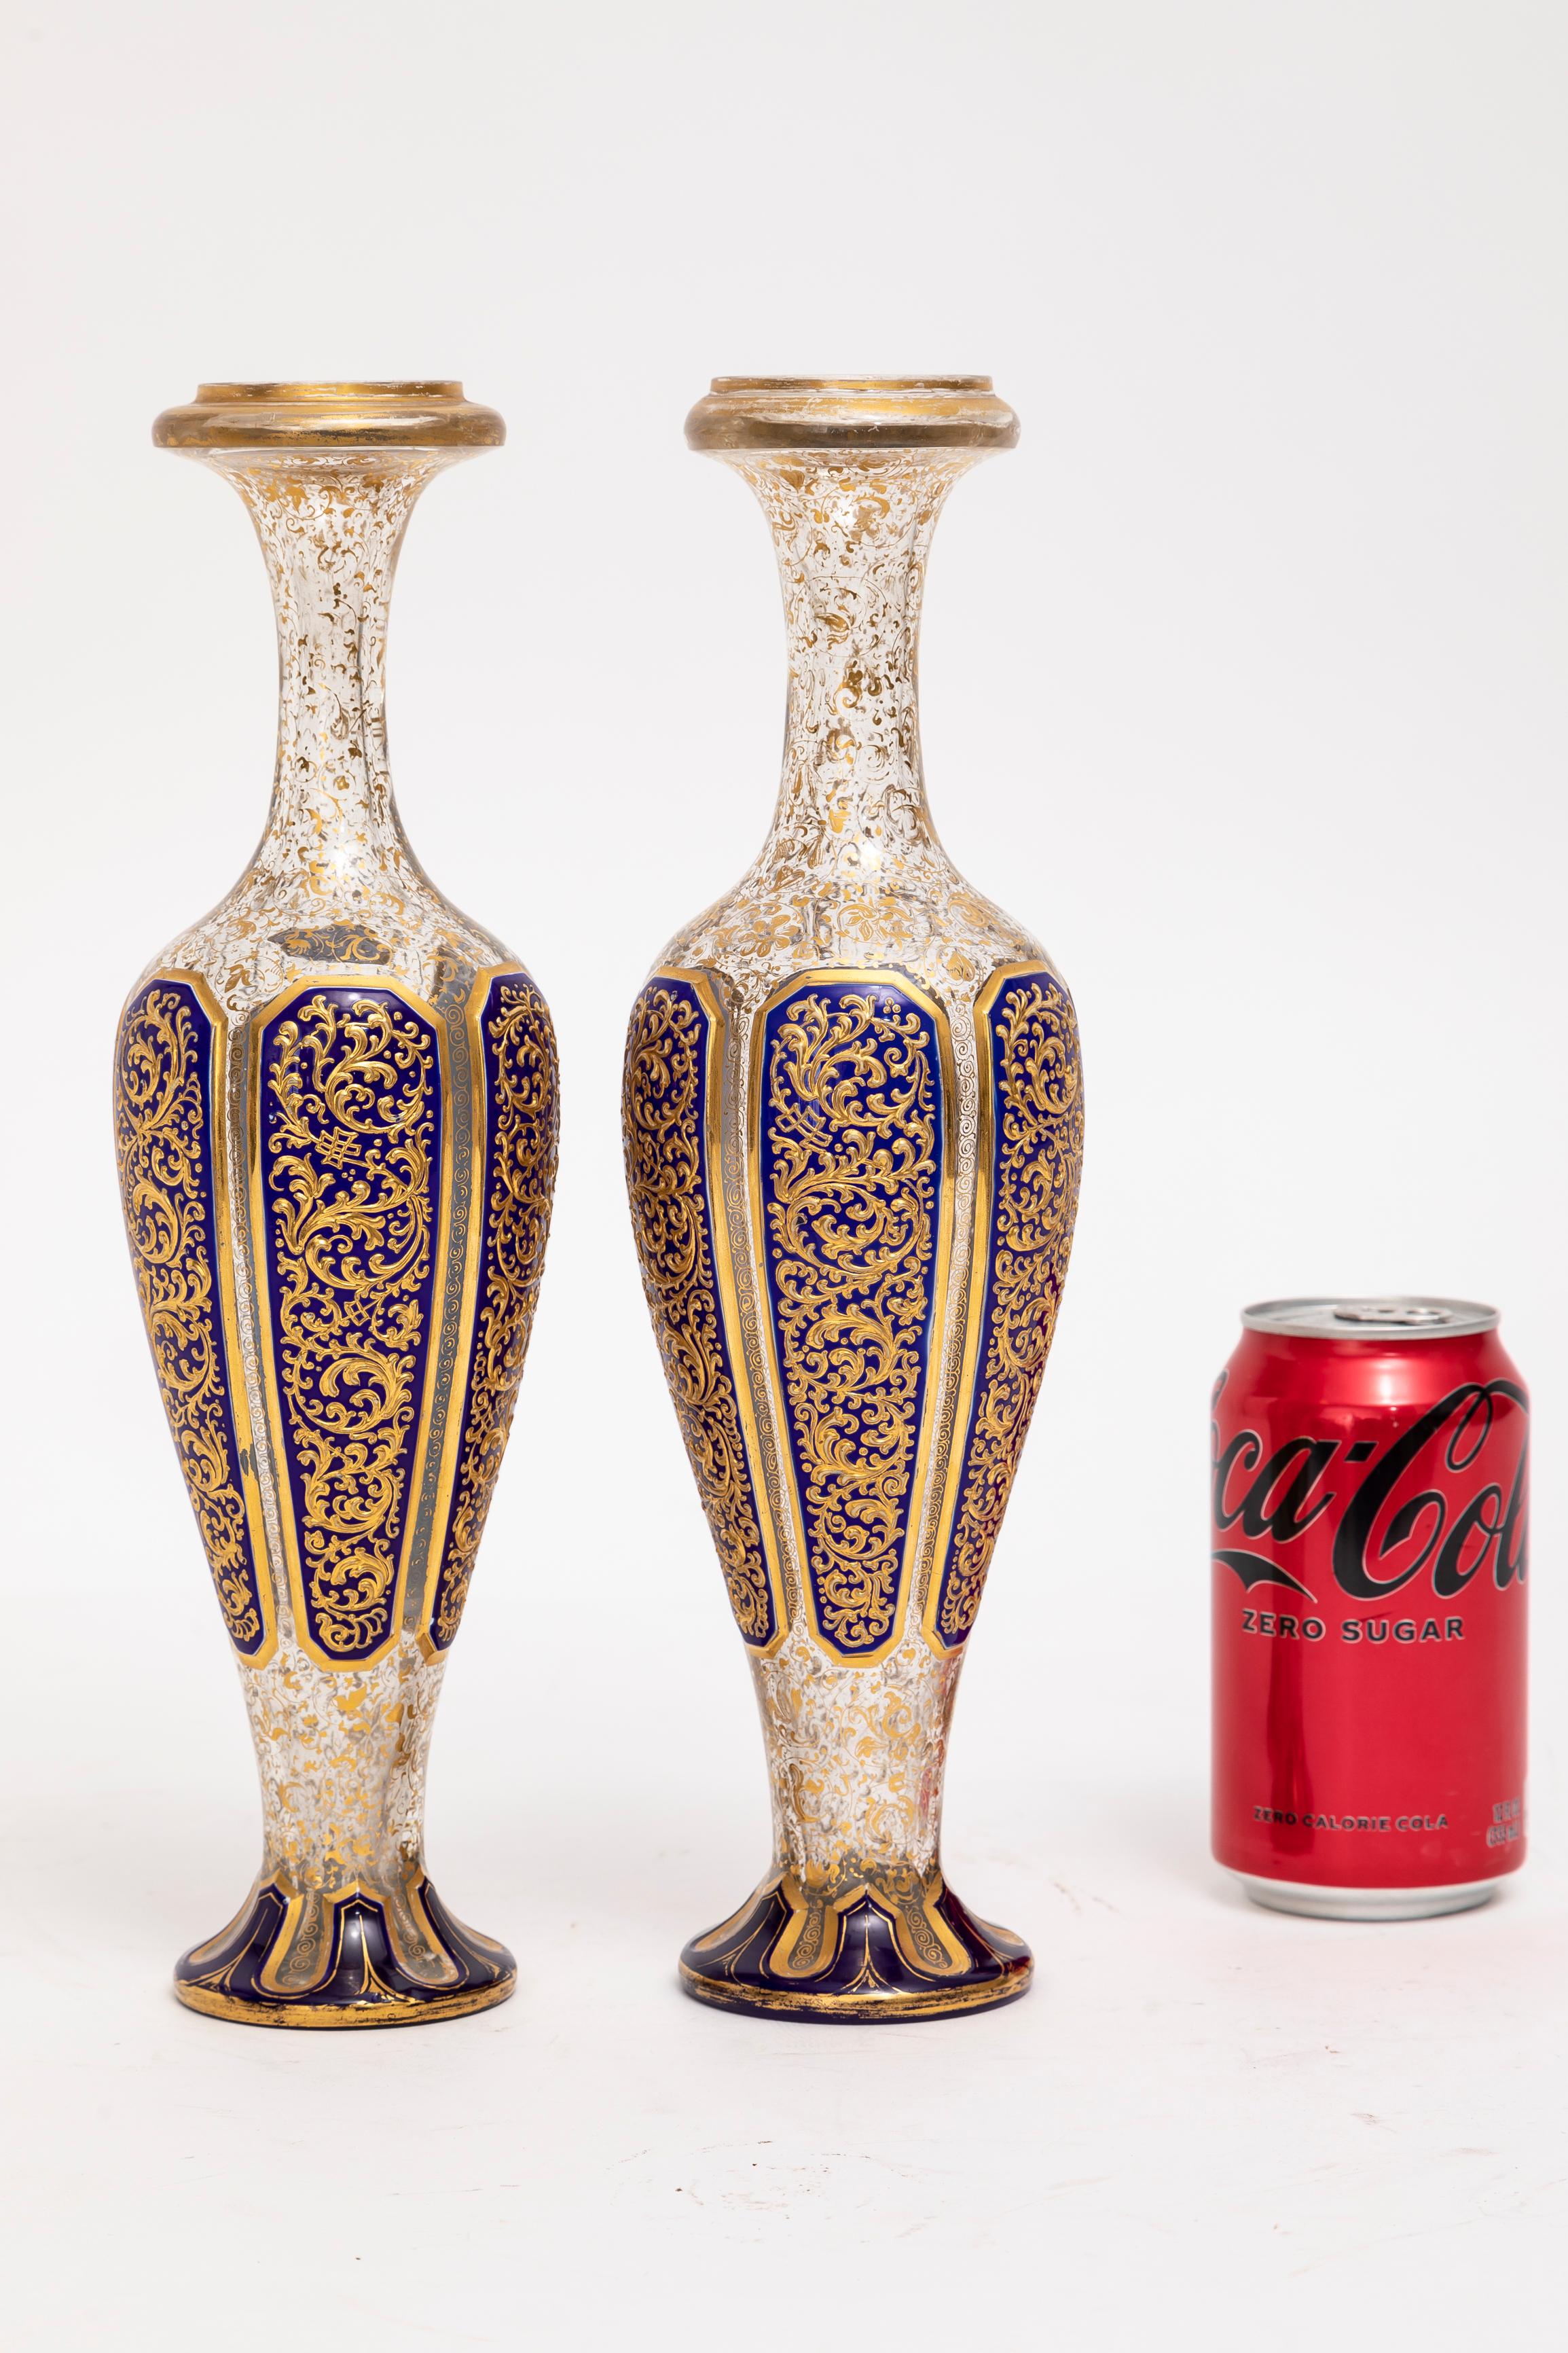 A Pair of 19th Century Moser Islamic motif Double Overlay Cobalt Blue Cut-to-Clear Gold Floral Decorated Vases.  This pair of gorgeous crystal vases, adorned with intricate gold floral decorations in the Islamic taste, showcases the pinnacle of